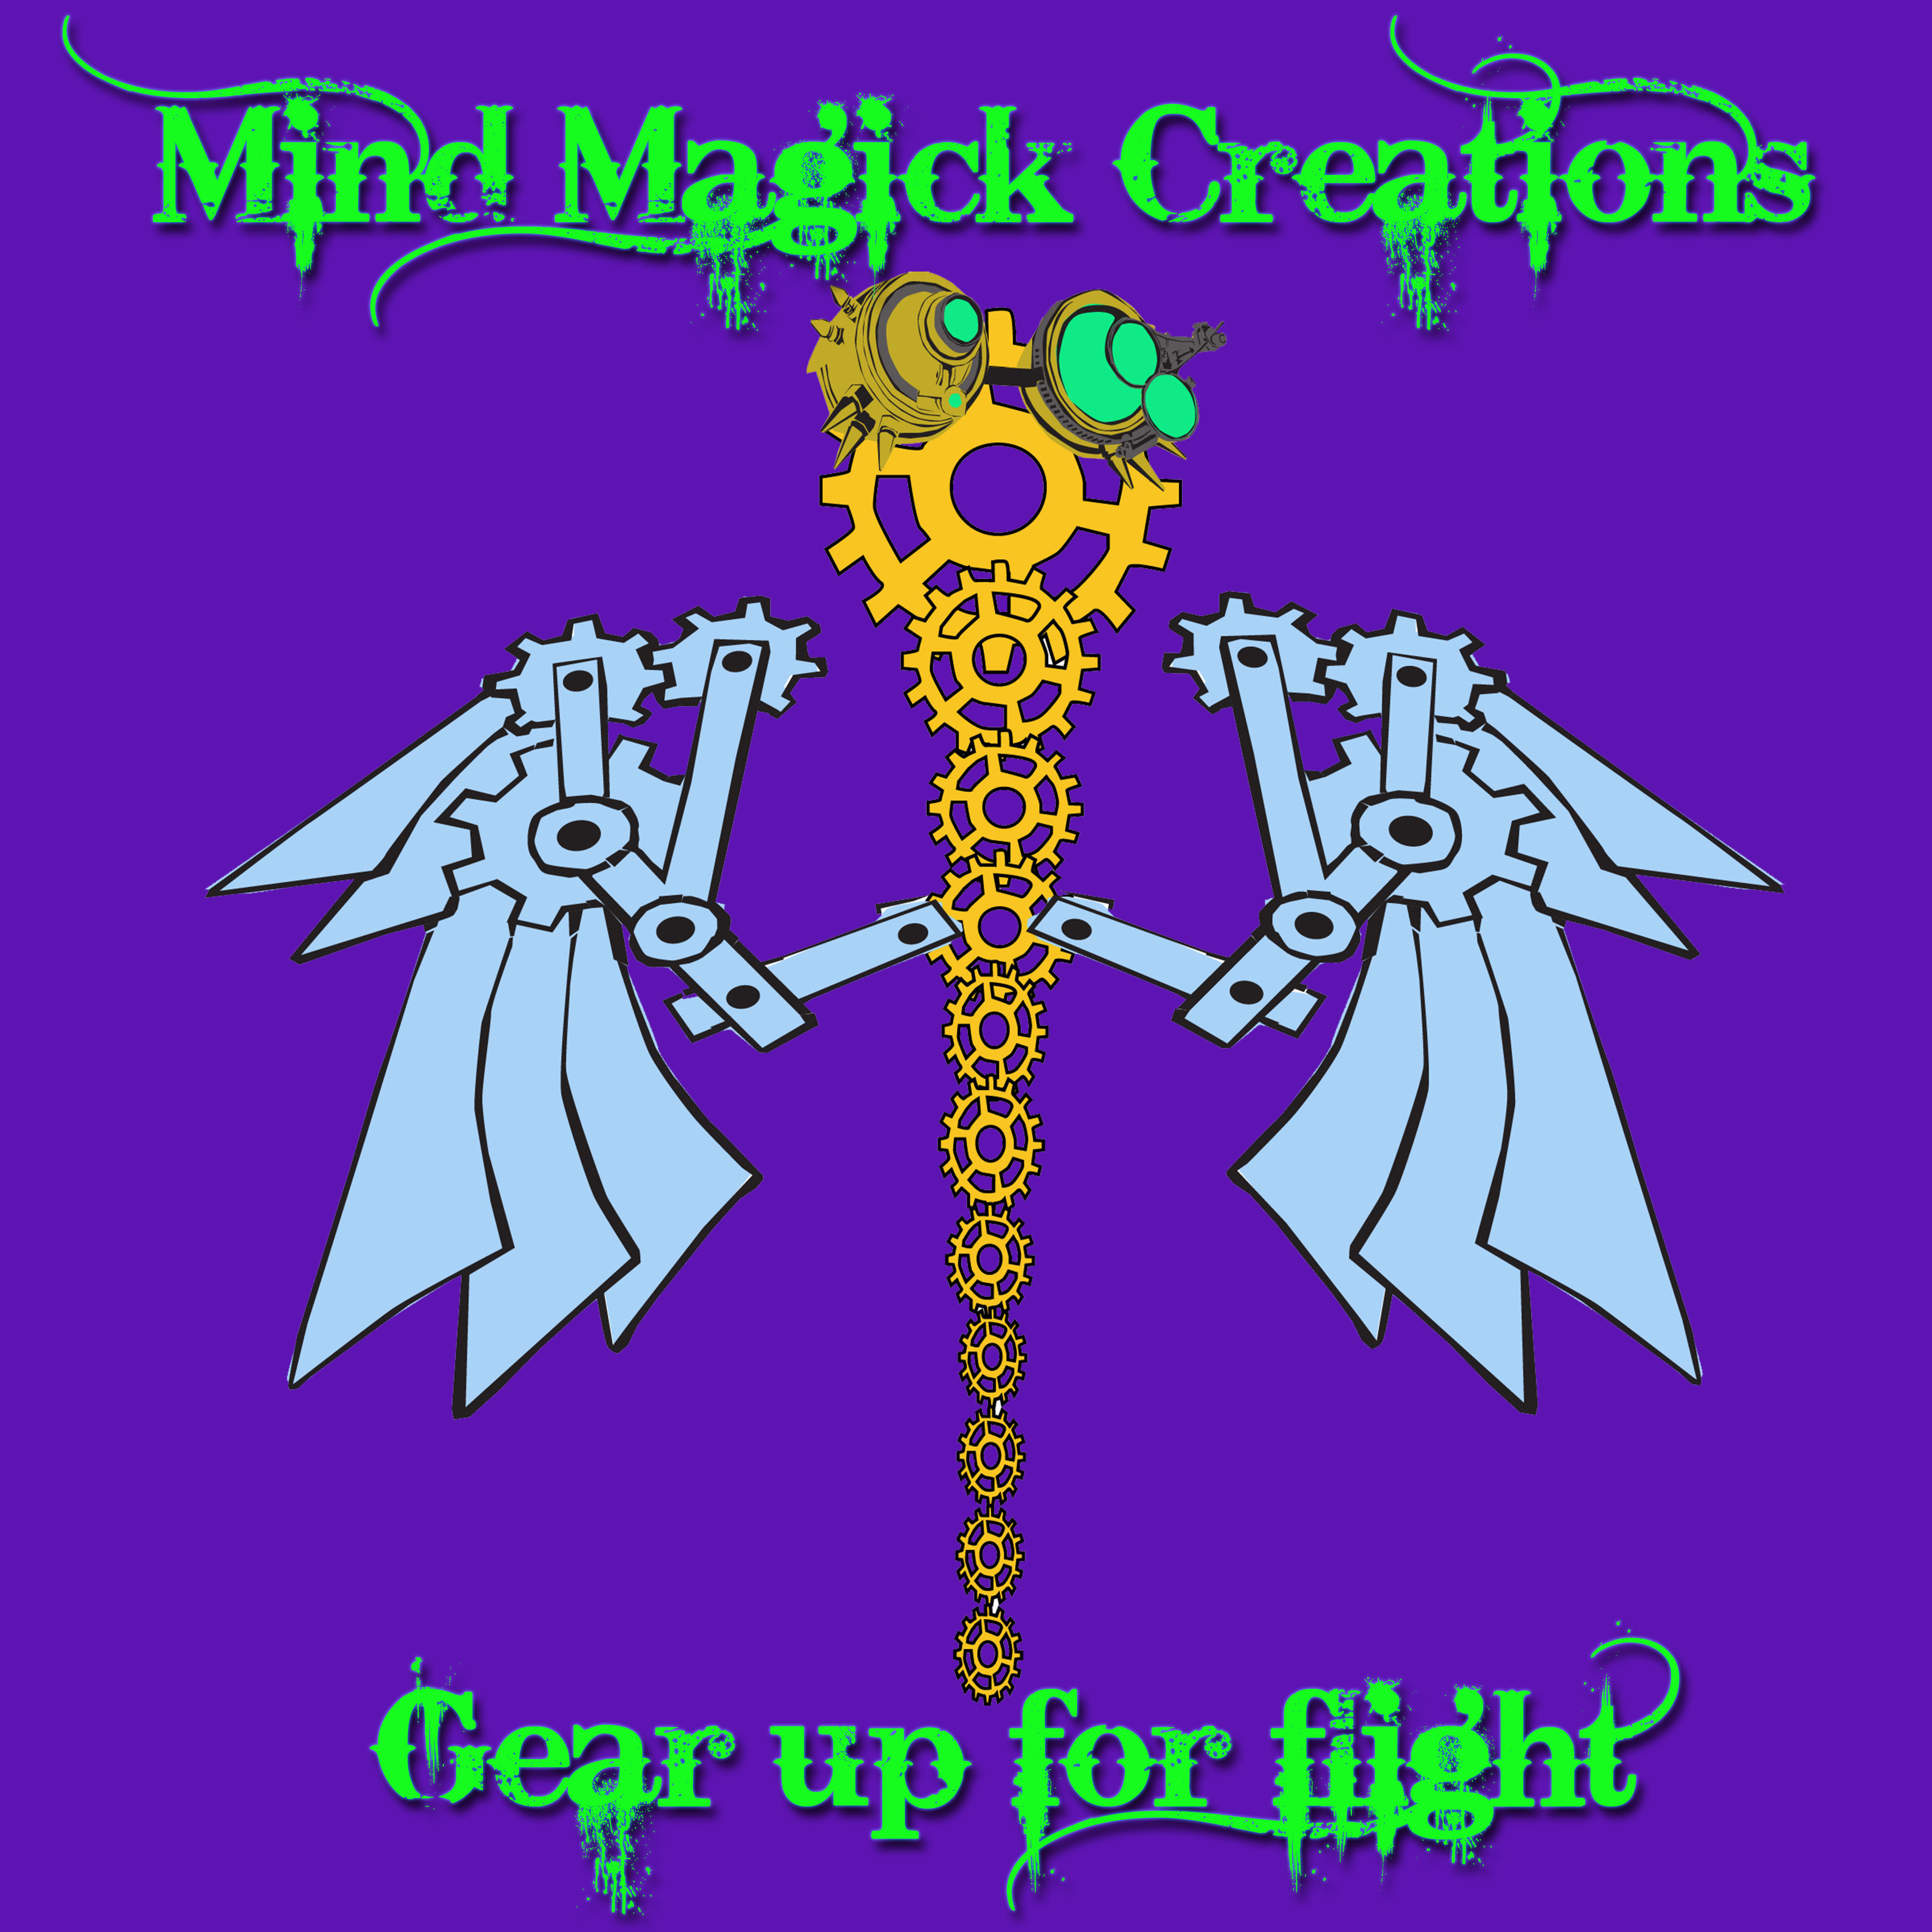 Mind Magick Creations: Gear up for flight